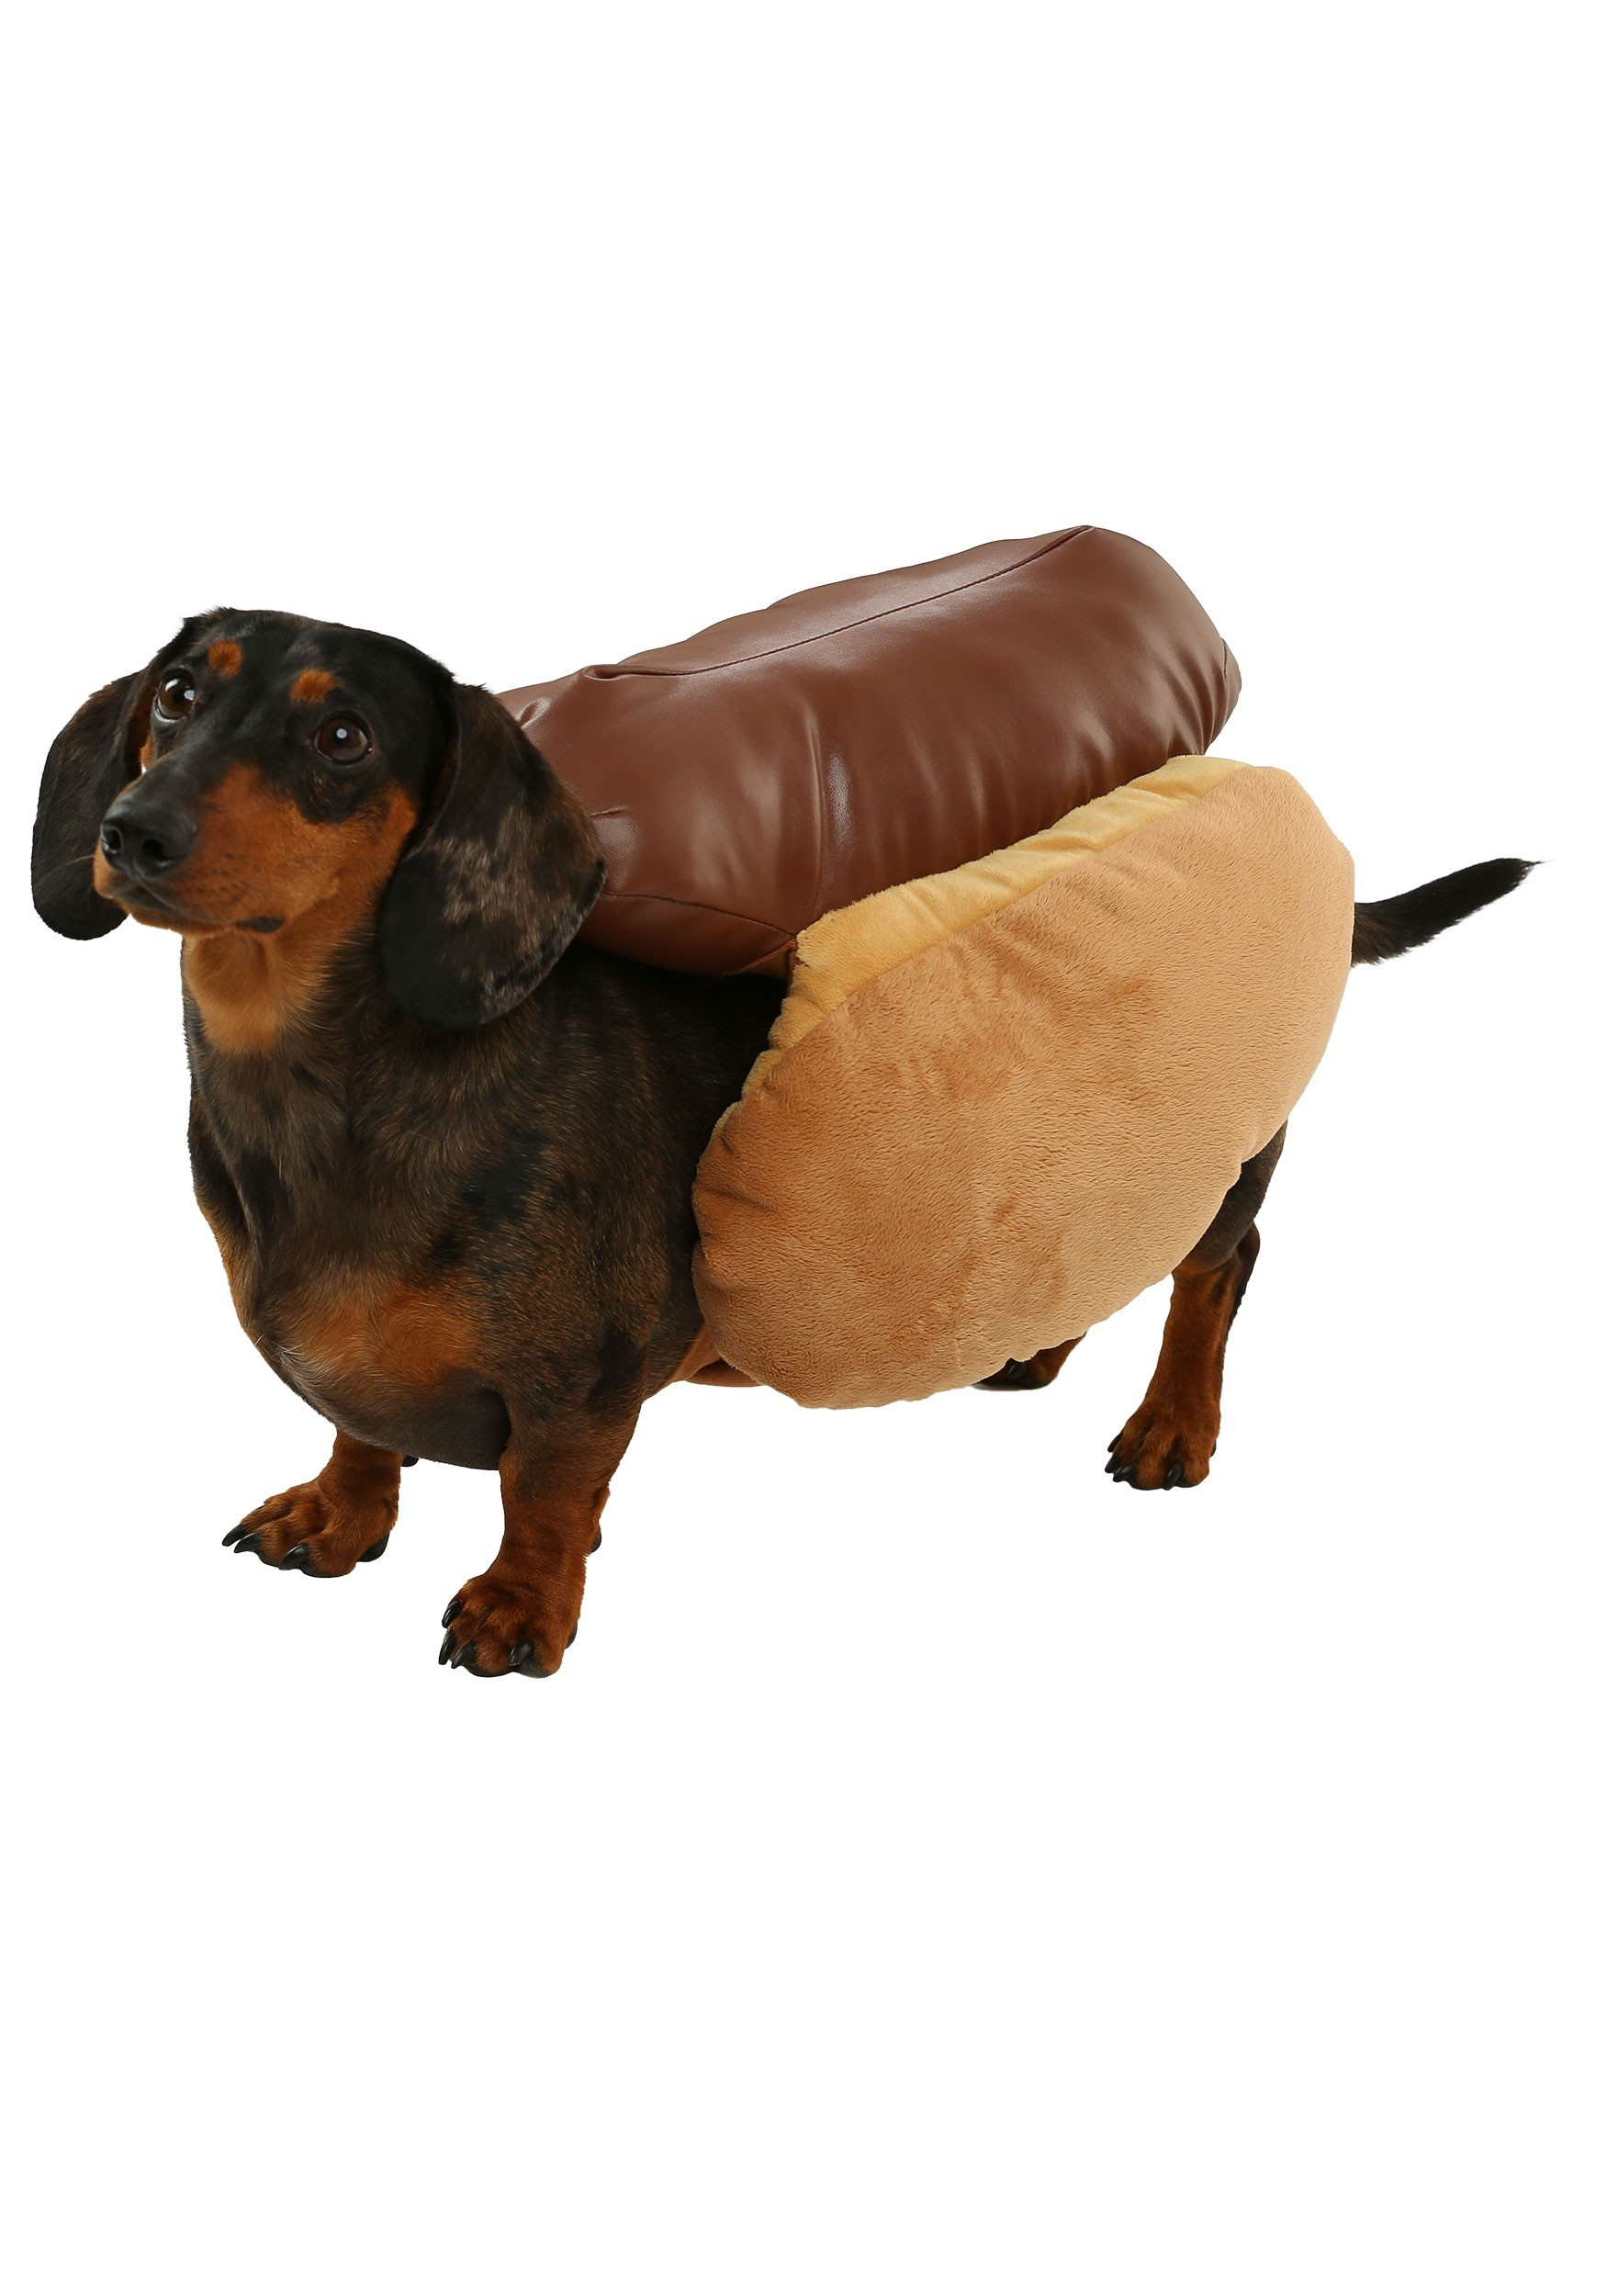 Hot Dog Halloween Costumes For Dogs
 Hot Dog Costume for Dogs